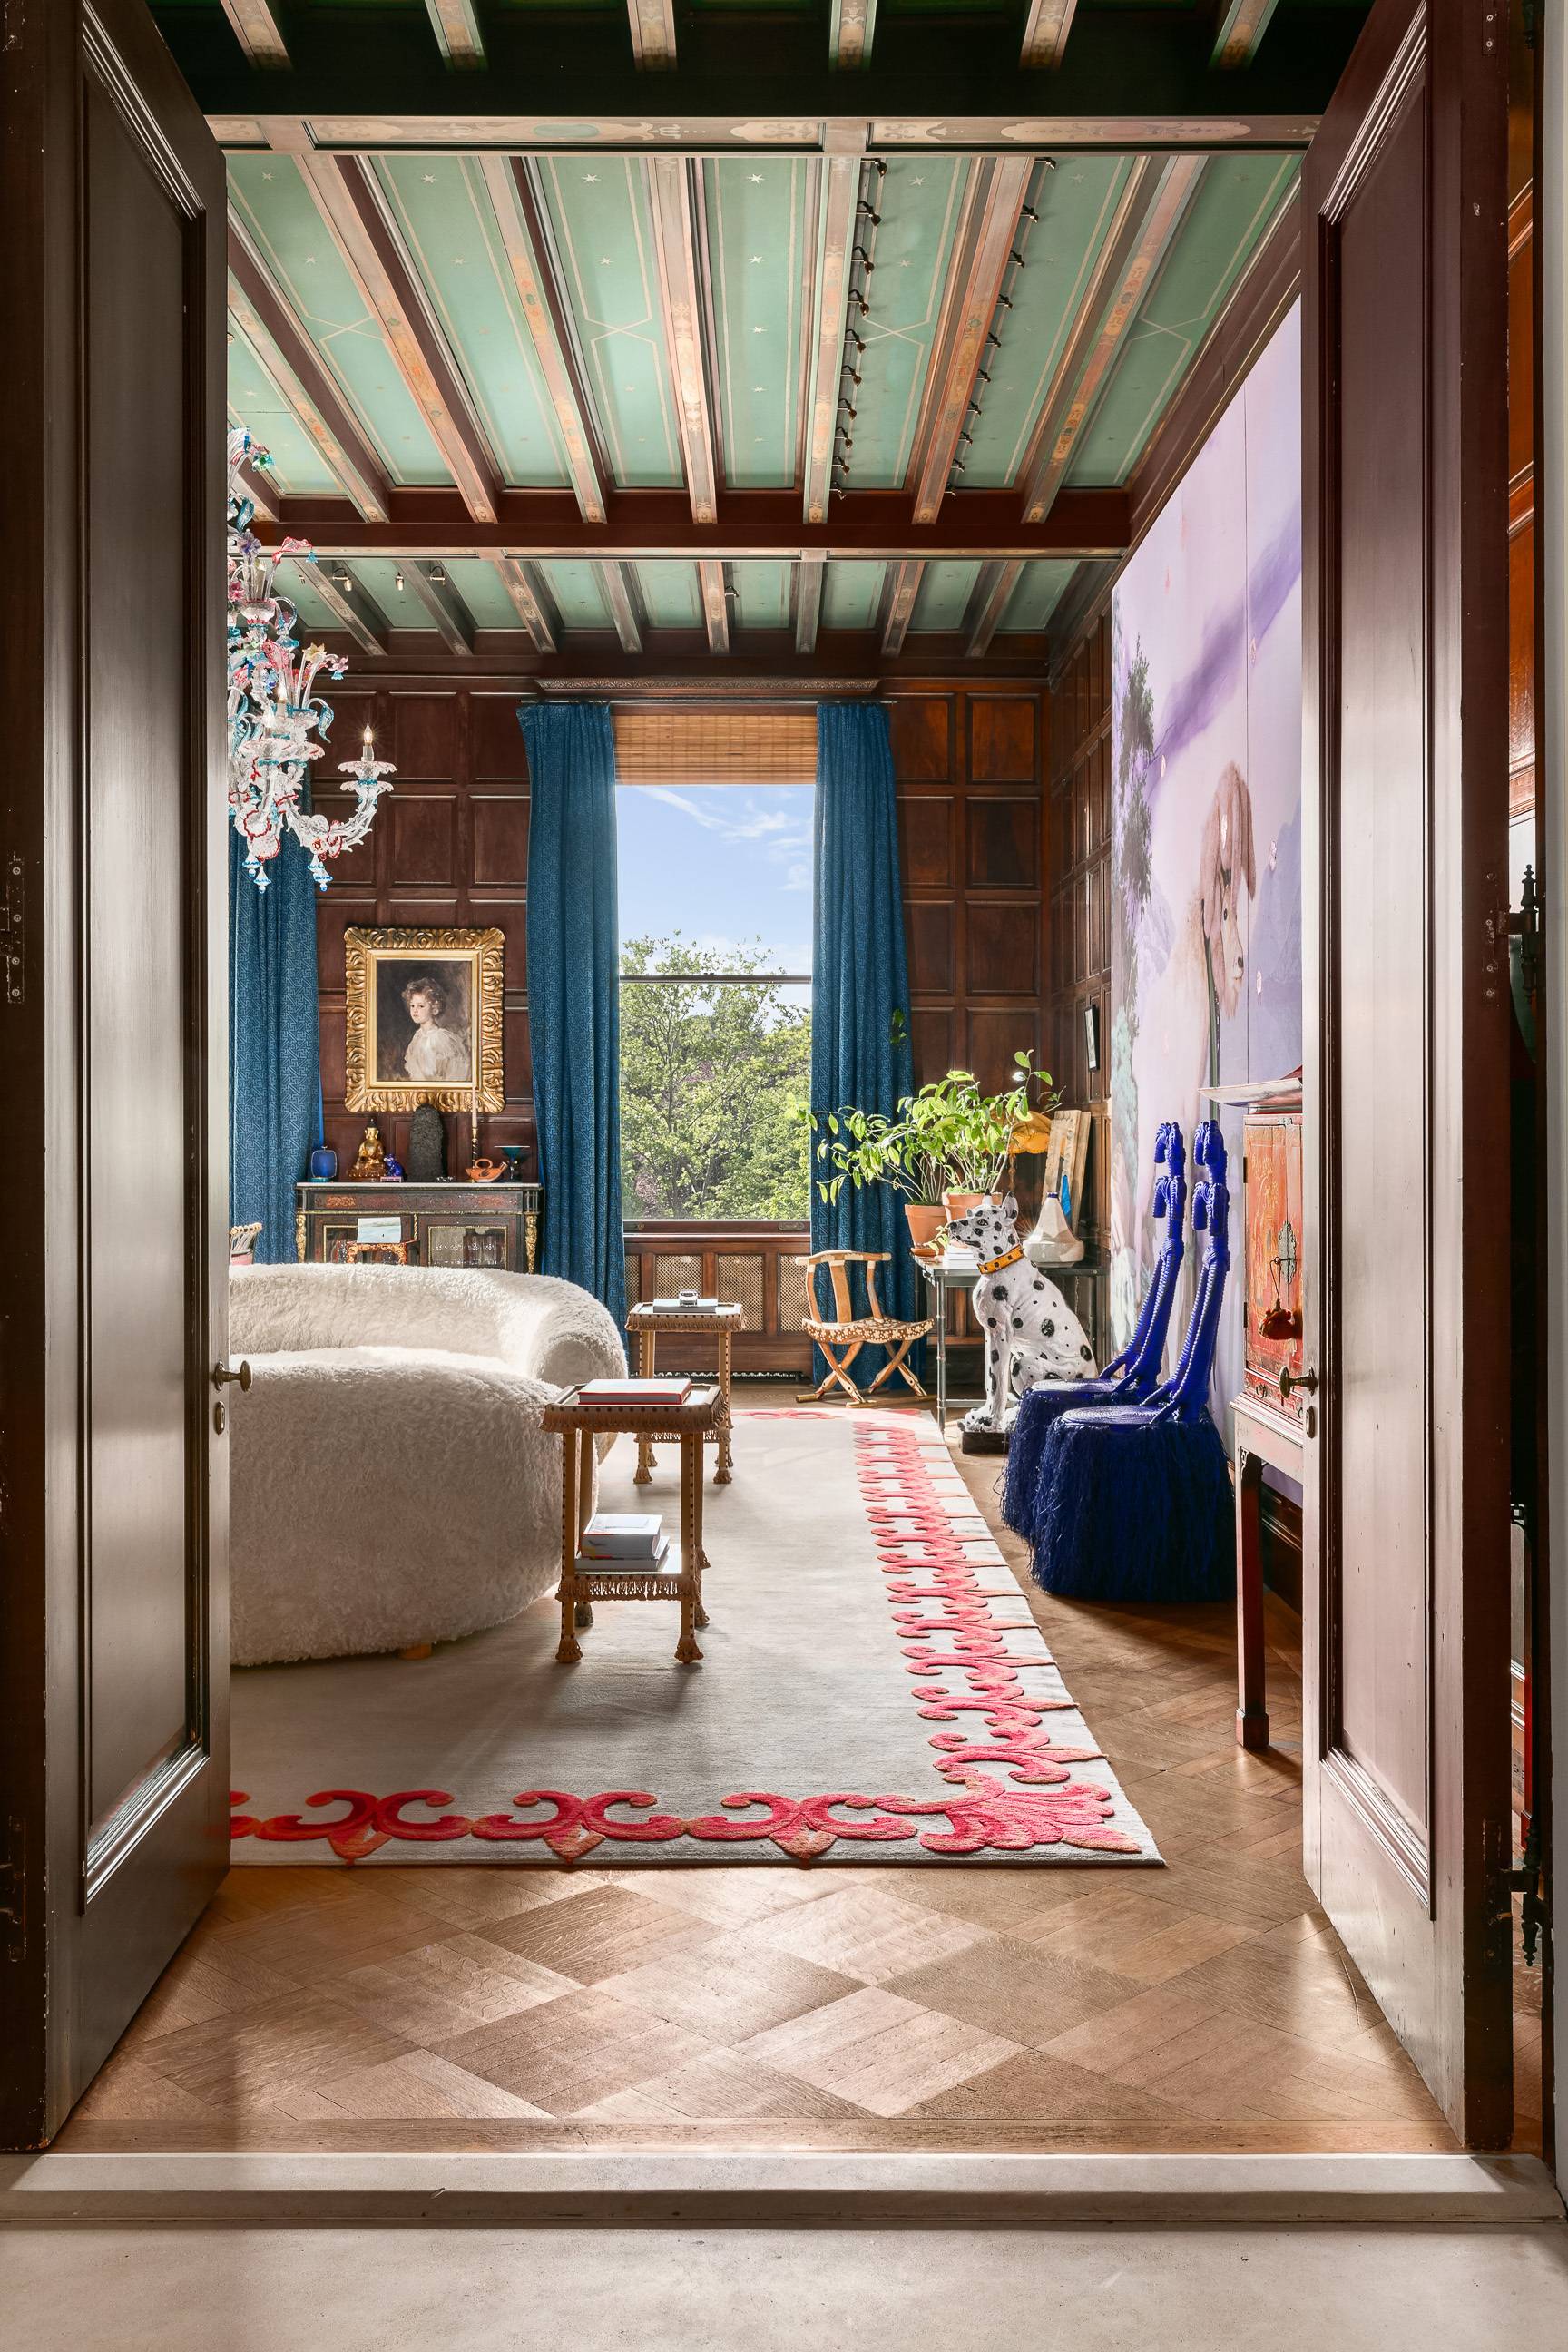 A design tour de force, the mansion at 973 Fifth Avenue, architected by Stanford White of McKim, Mead and White, spans more than 16, 000 square feet over seven floors ...